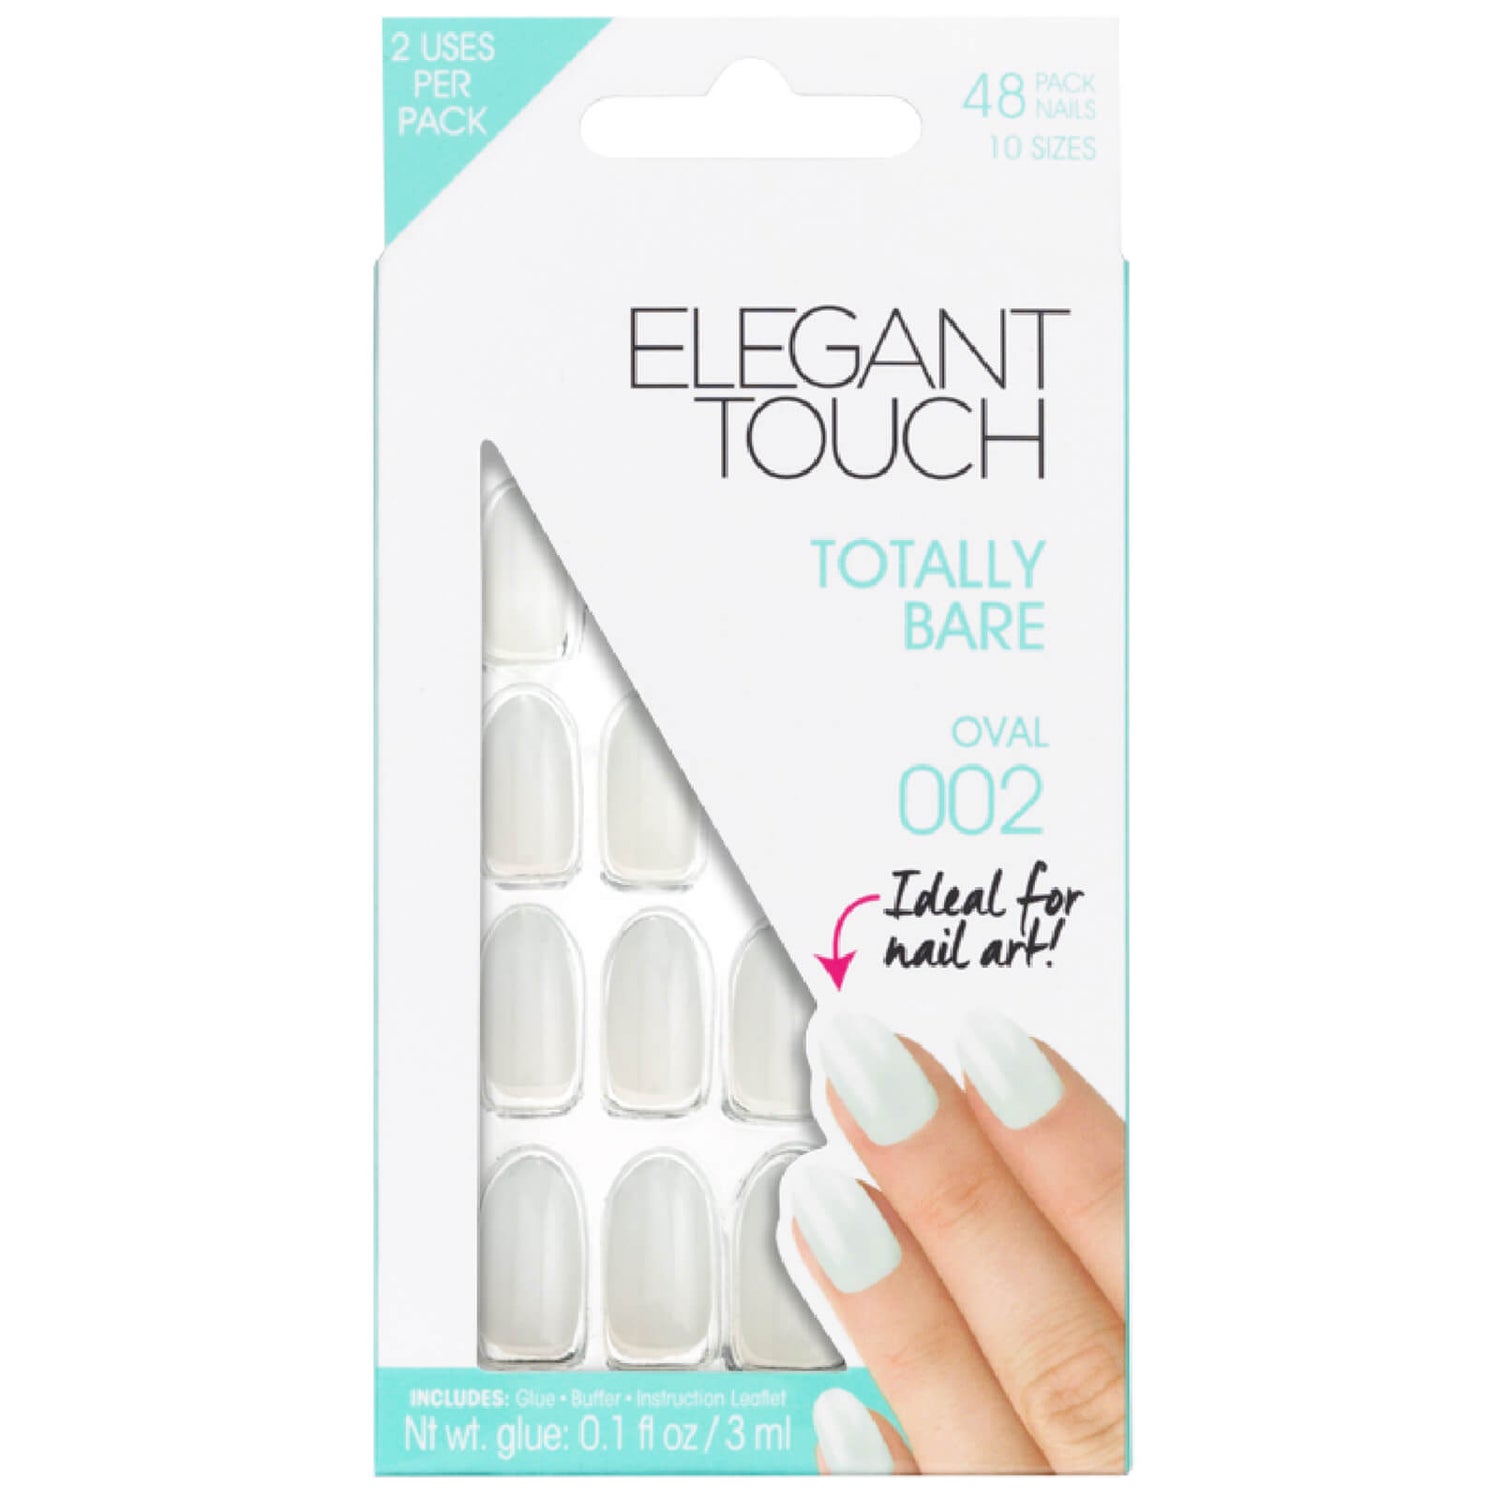 Elegant Touch Totally Bare Nails - Oval 002 - LOOKFANTASTIC